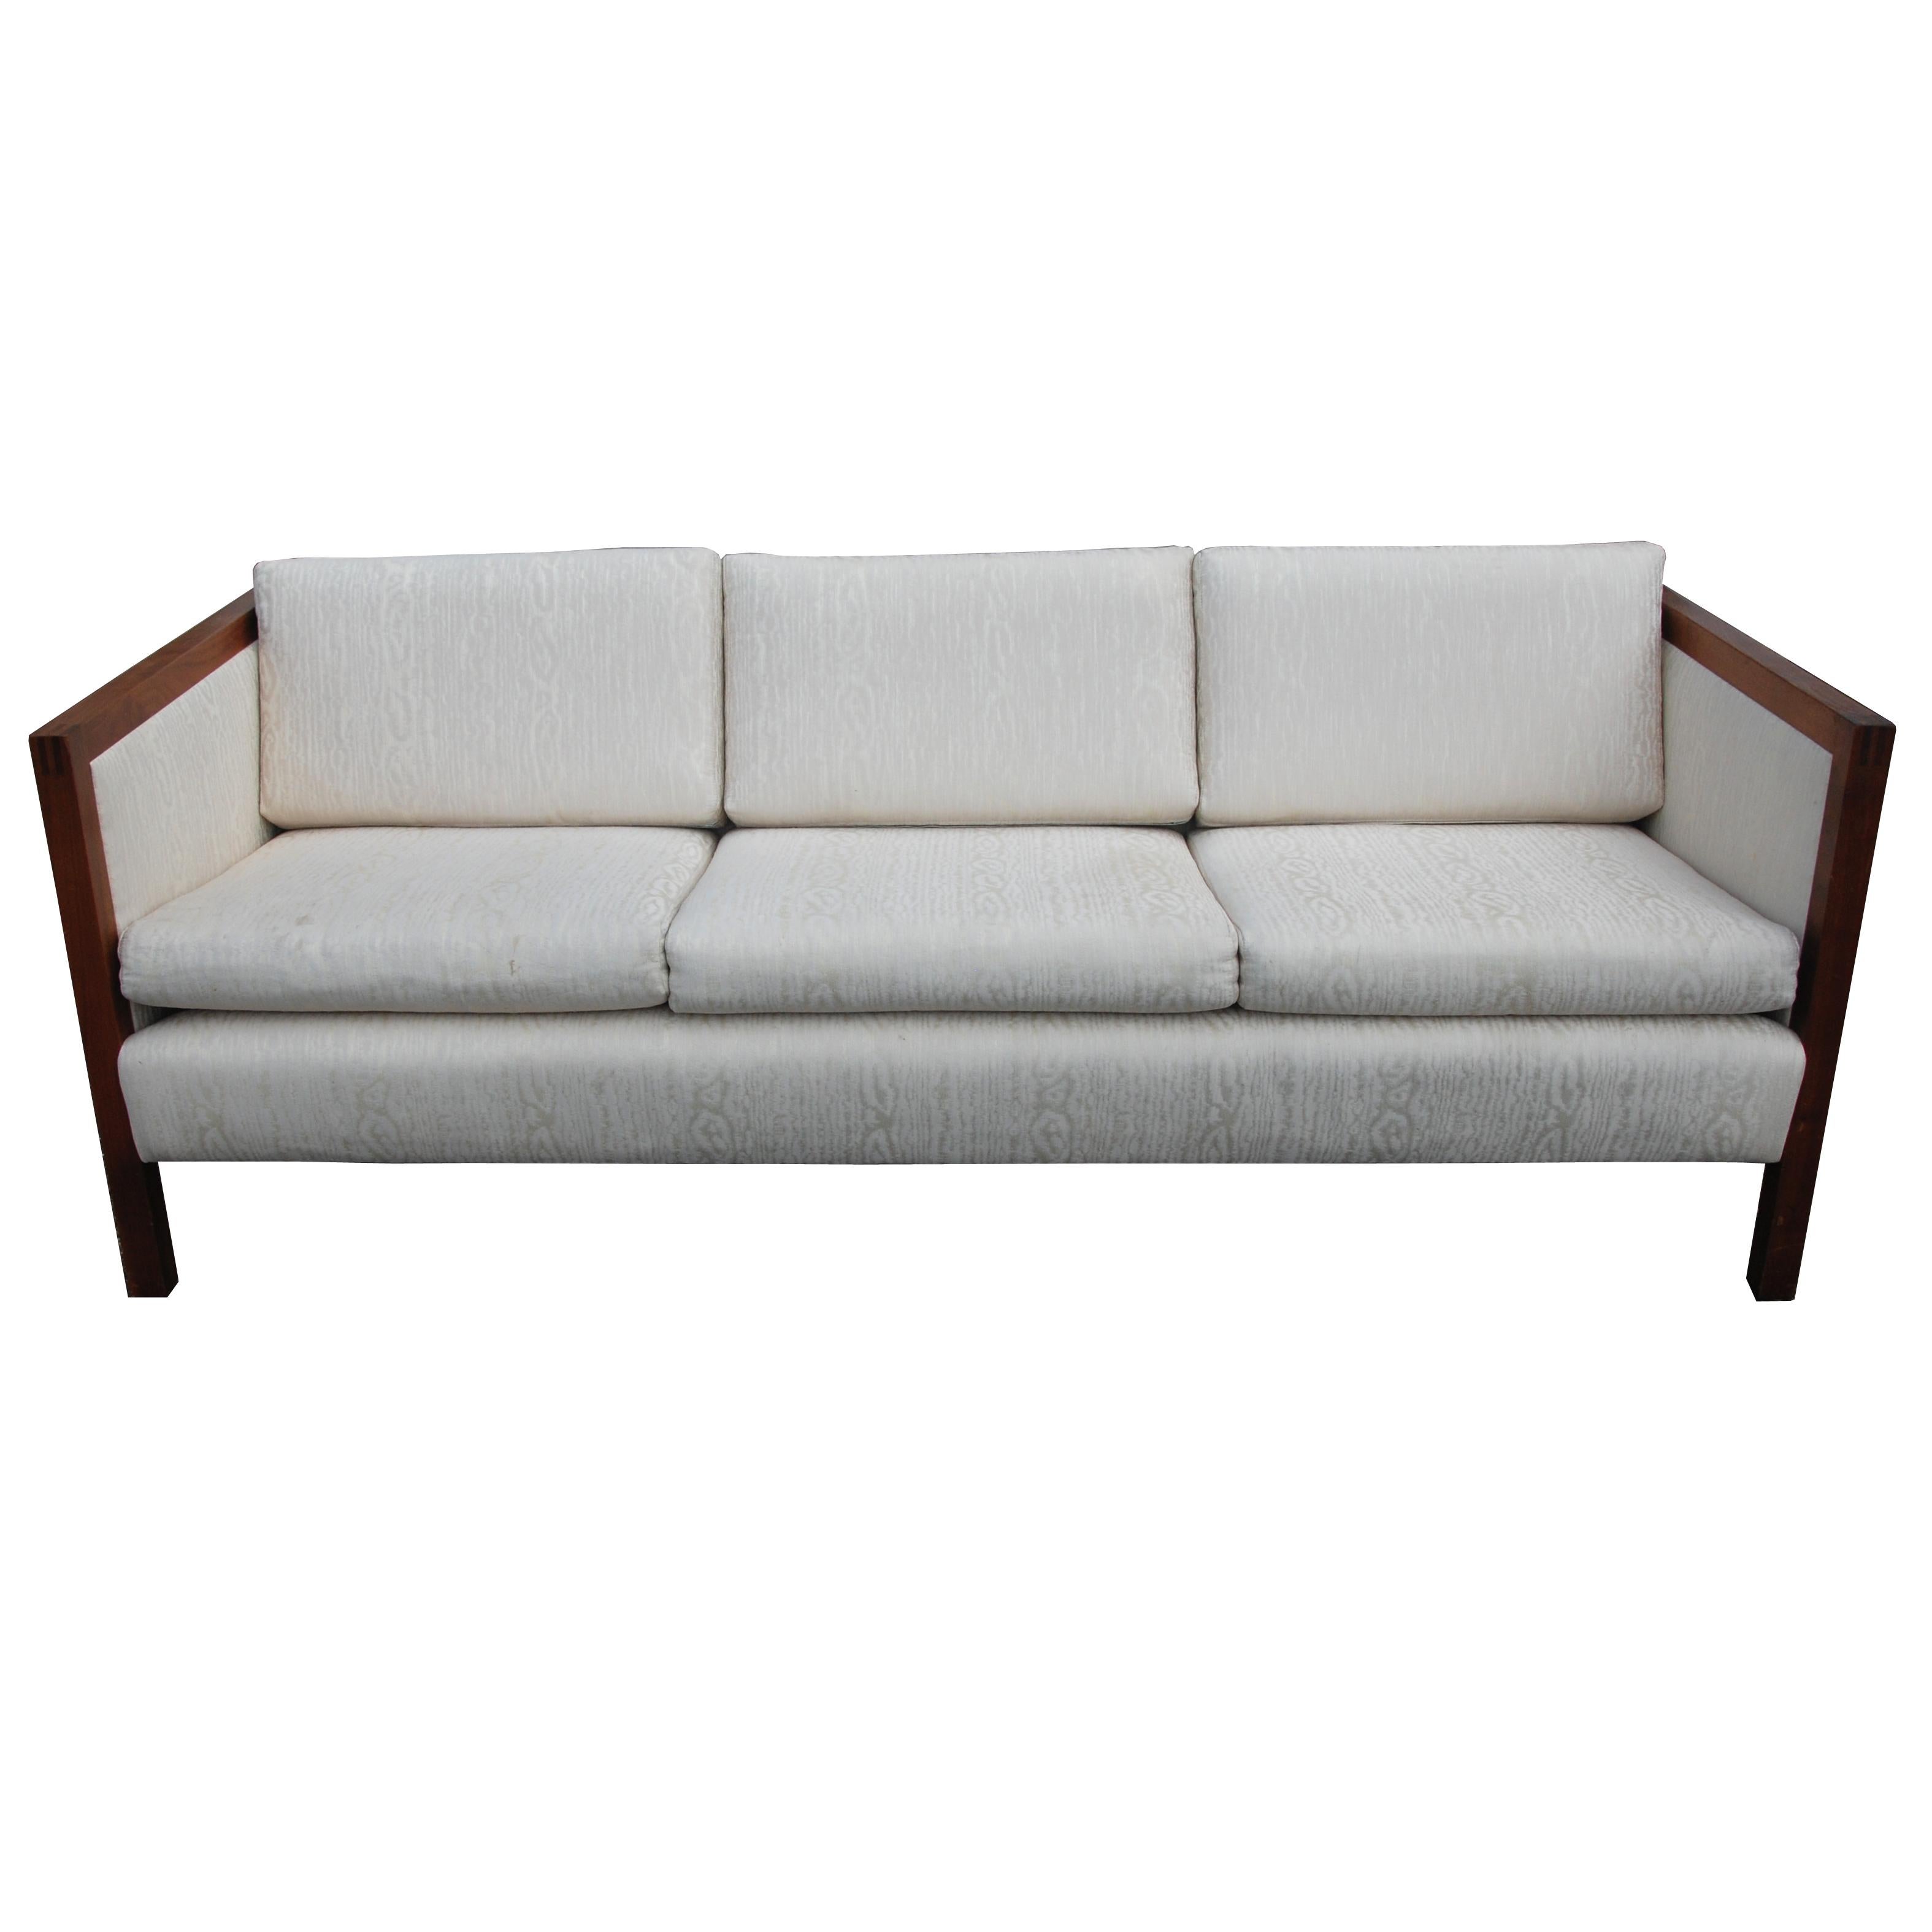 Classic lines with a trim in rich walnut with ivory upholstery. Measure: 6.5FT.

 